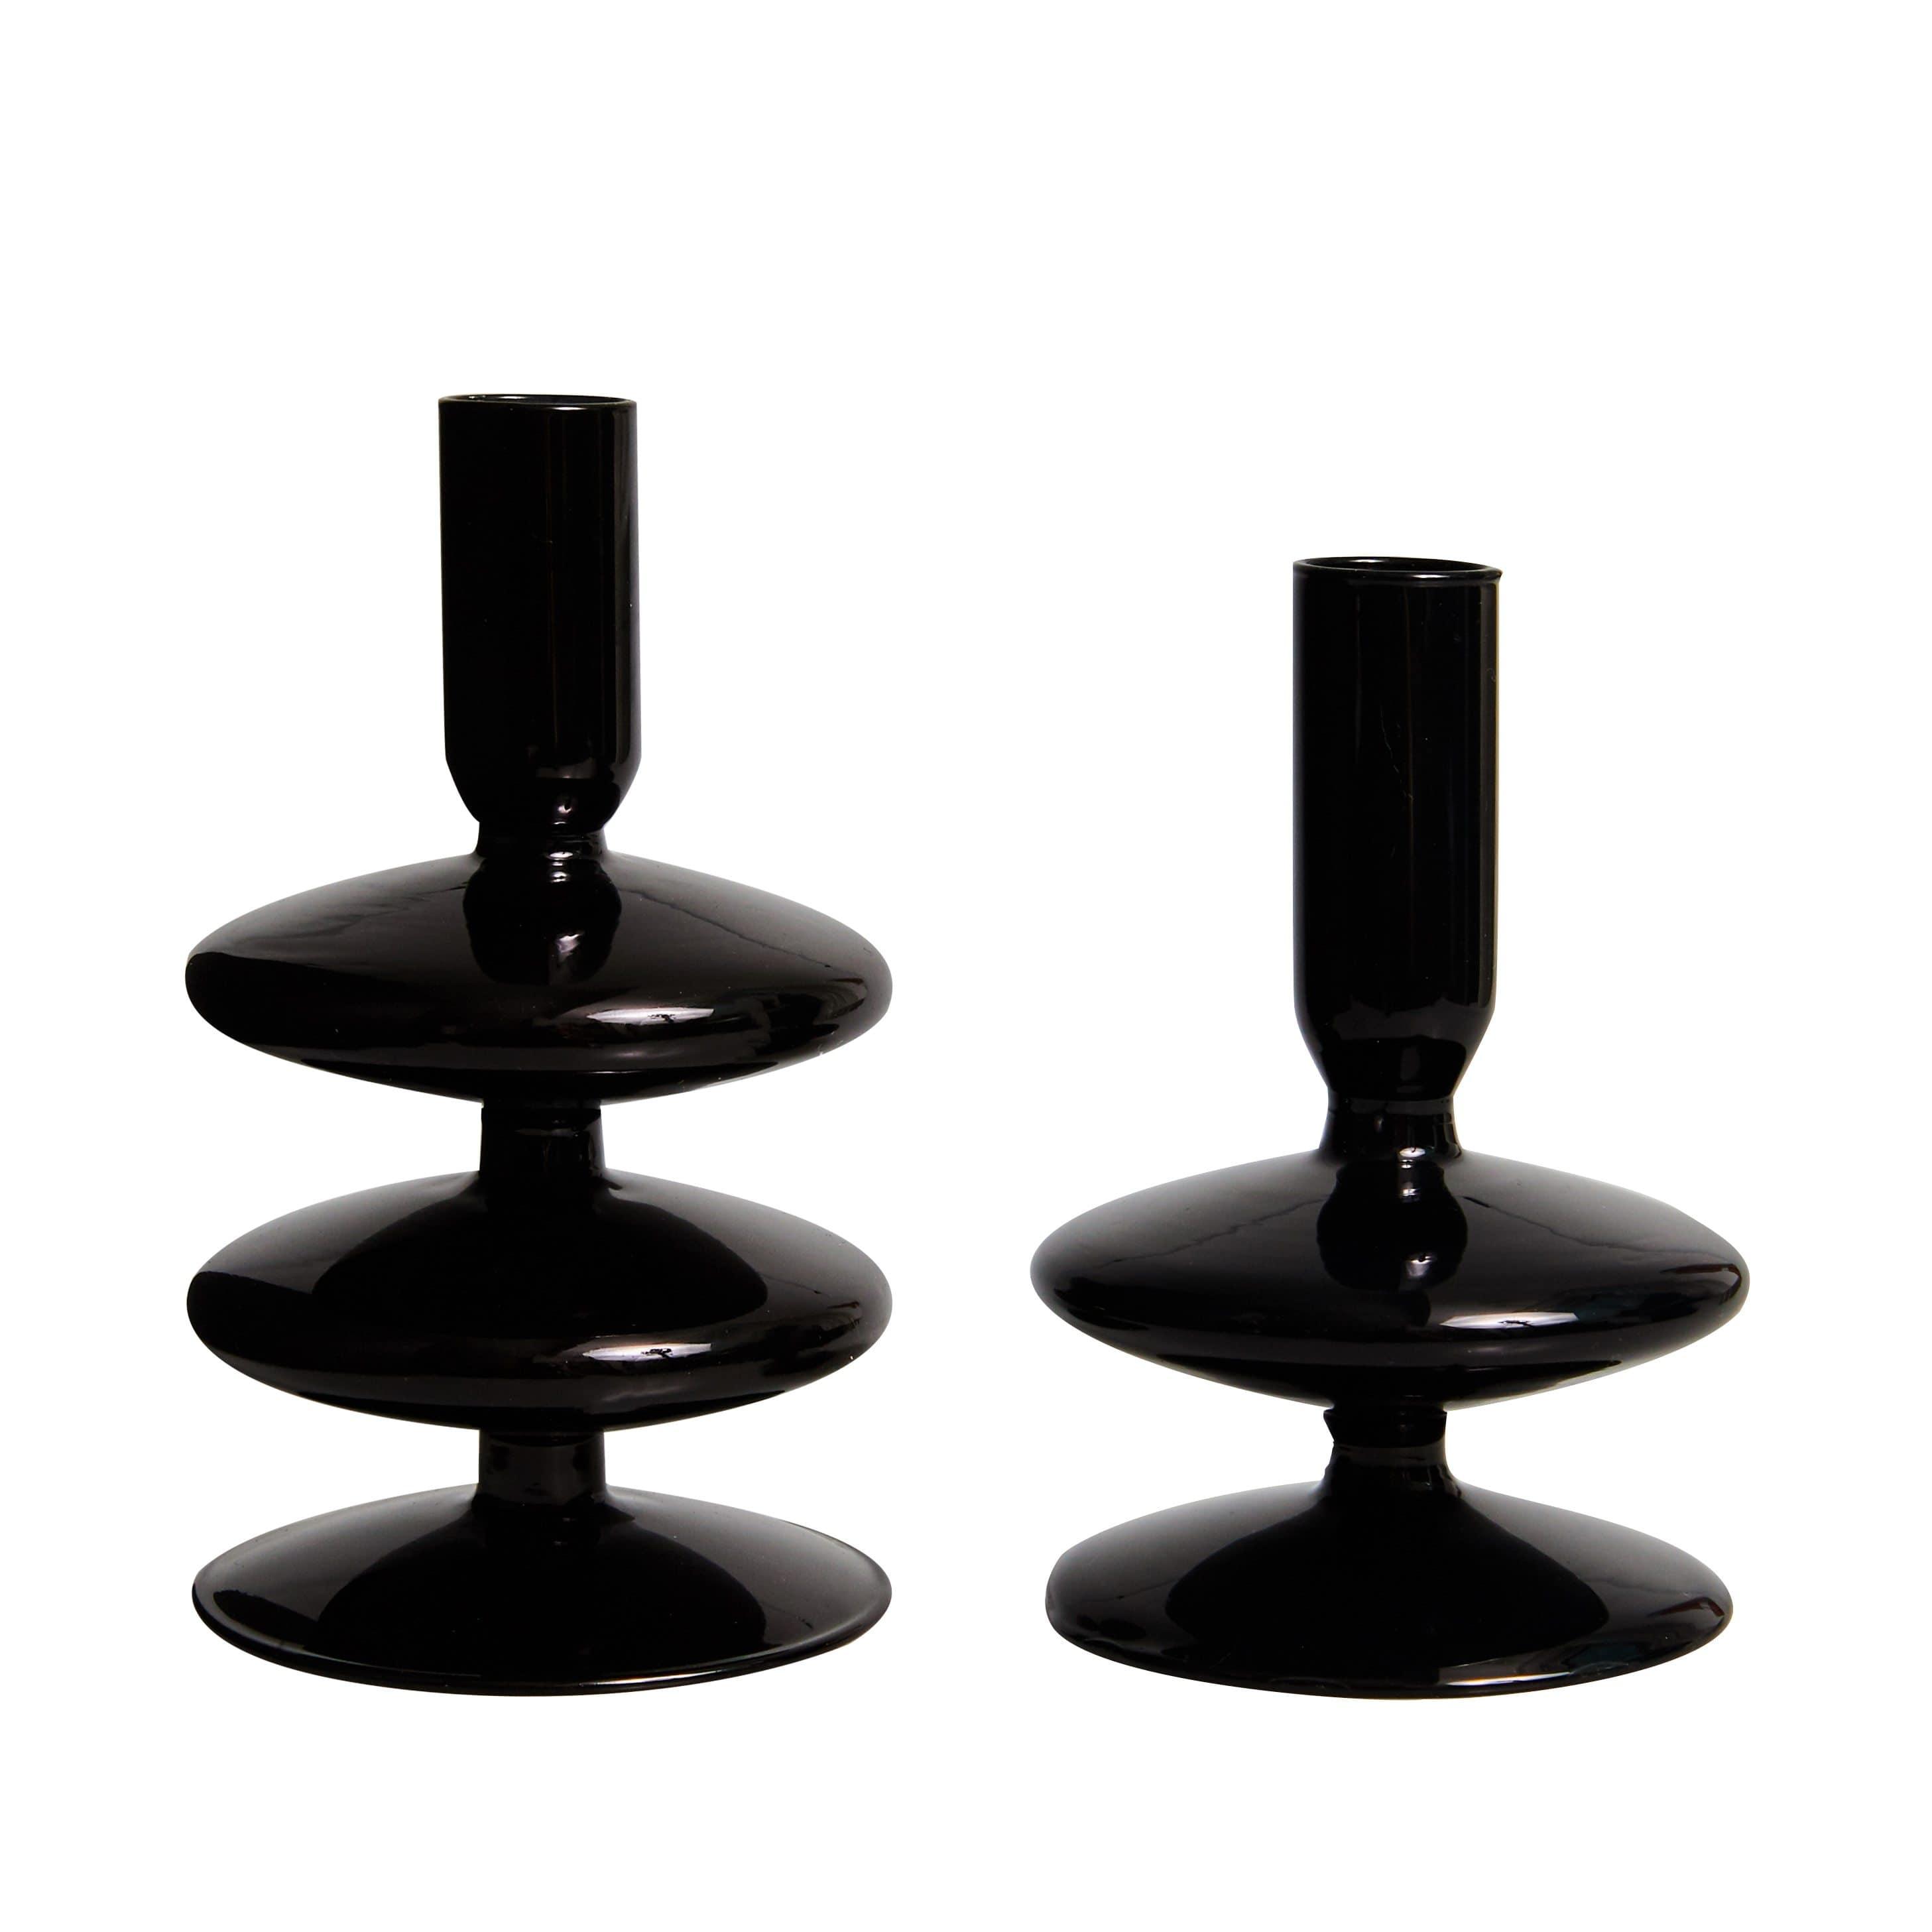 Shop 0 2pc set candlestick Abaco Candle Holder Mademoiselle Home Decor